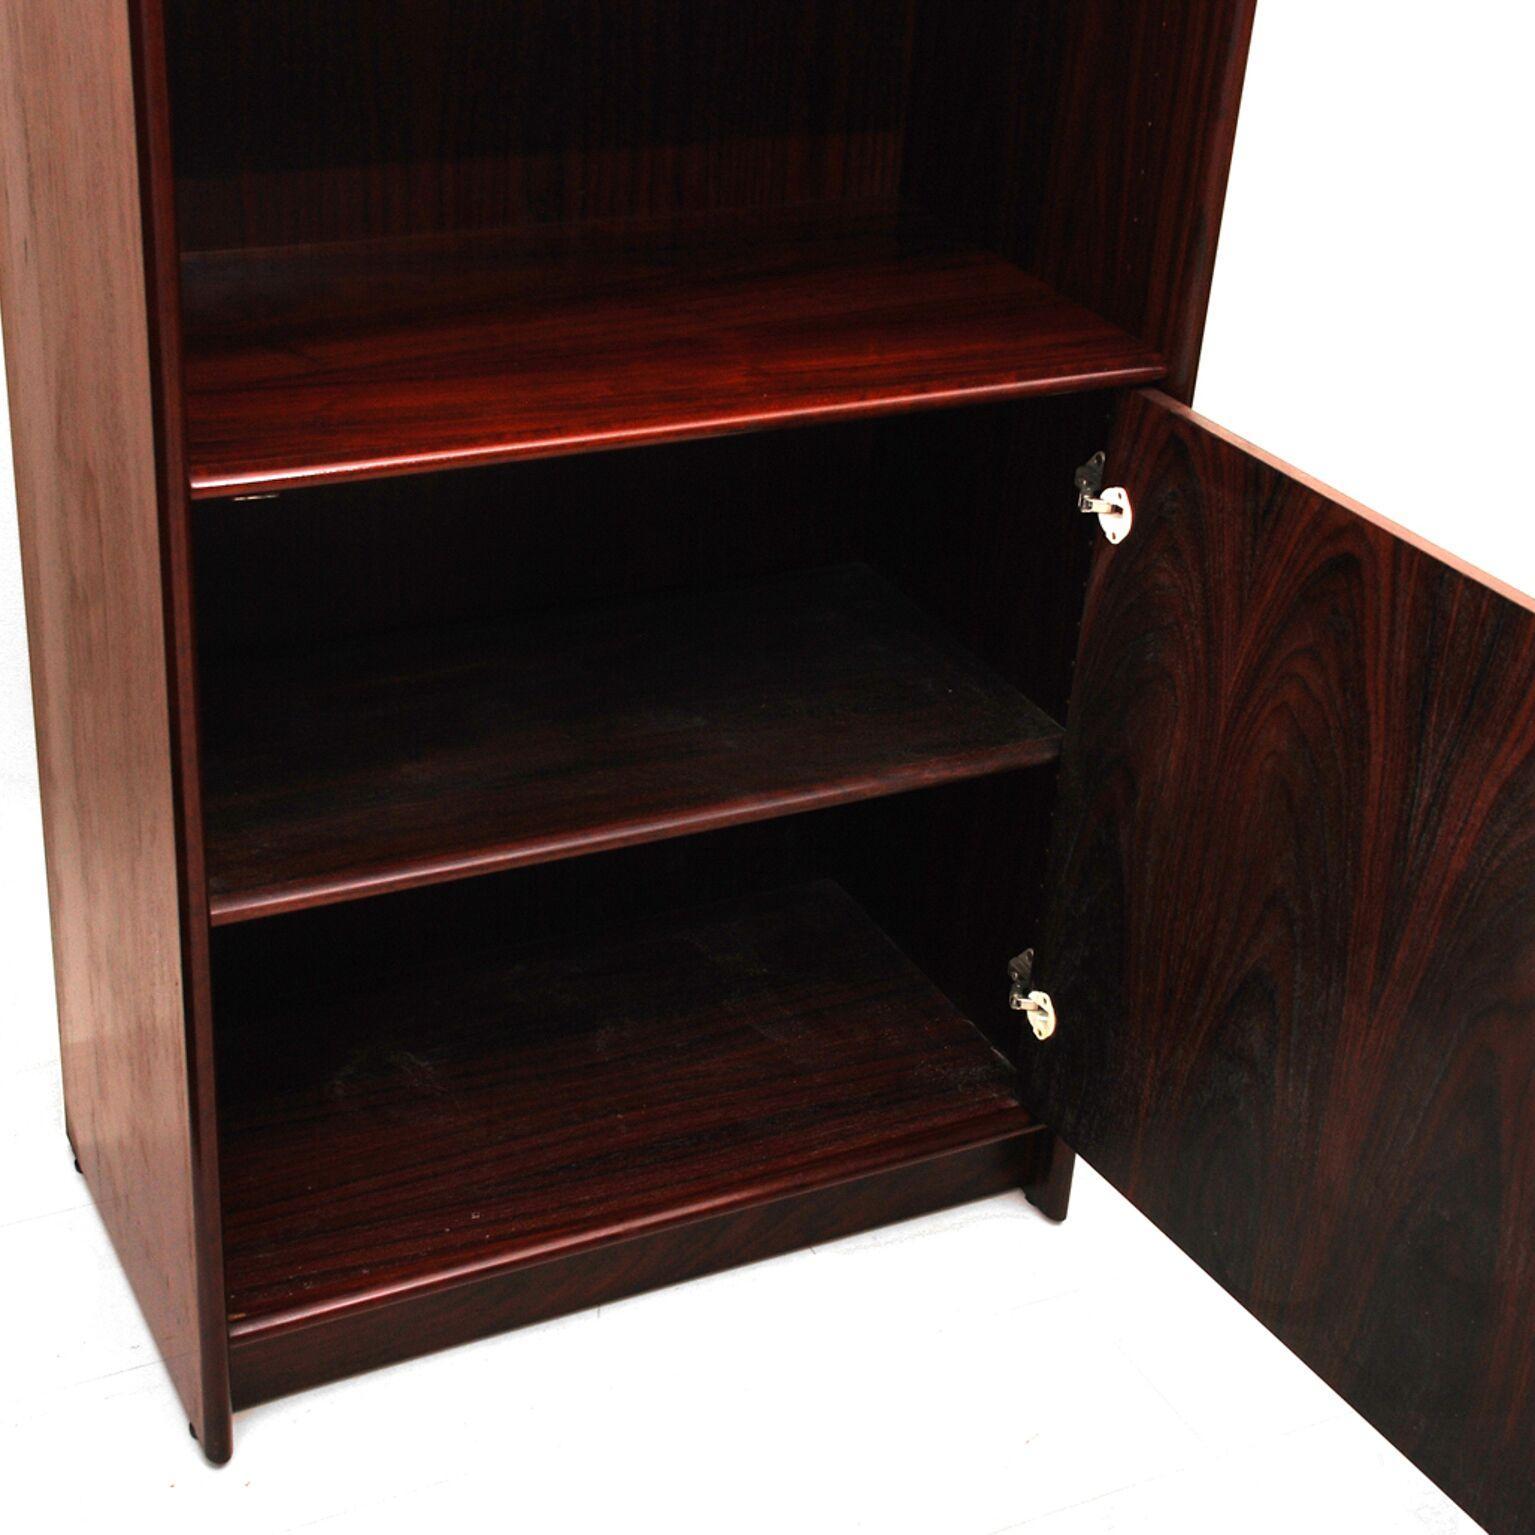 Mid-20th Century Pair of Danish Modern Rosewood Bookcases with Doors, Denmark, 1960s